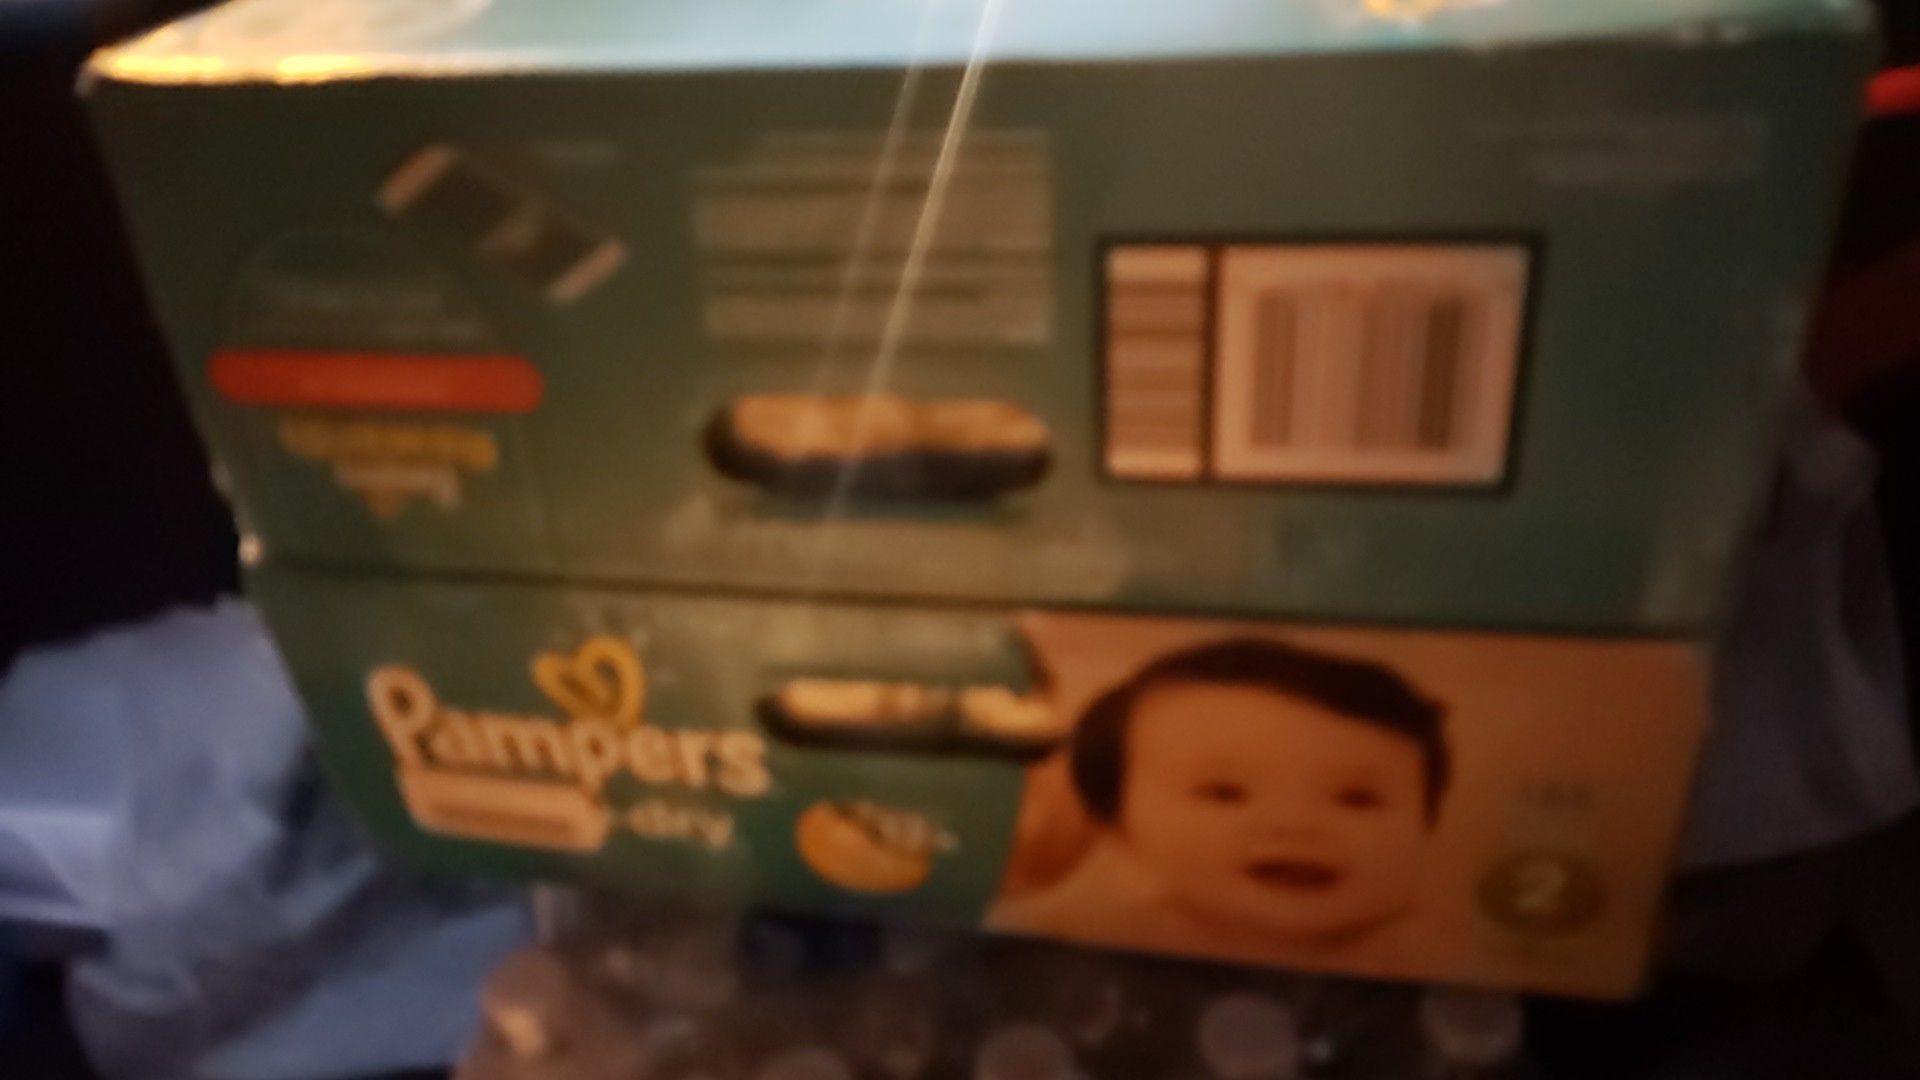 Pampers size 2 baby diapers.